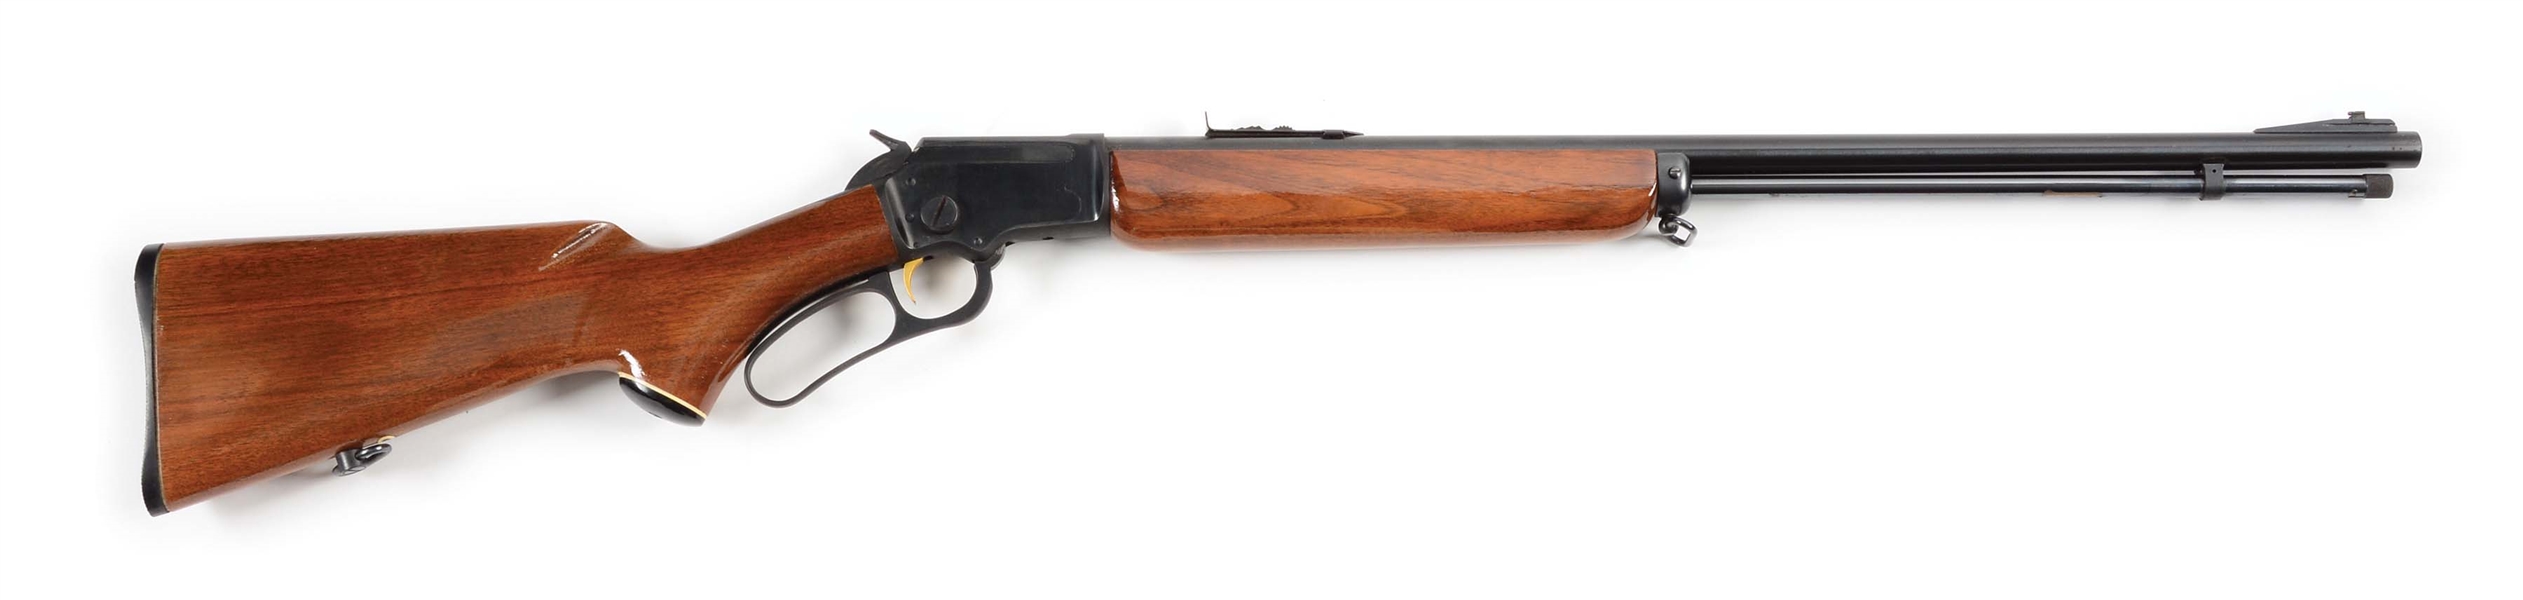 (M) MARLIN GOLDEN 39-A LEVER ACTION RIFLE.